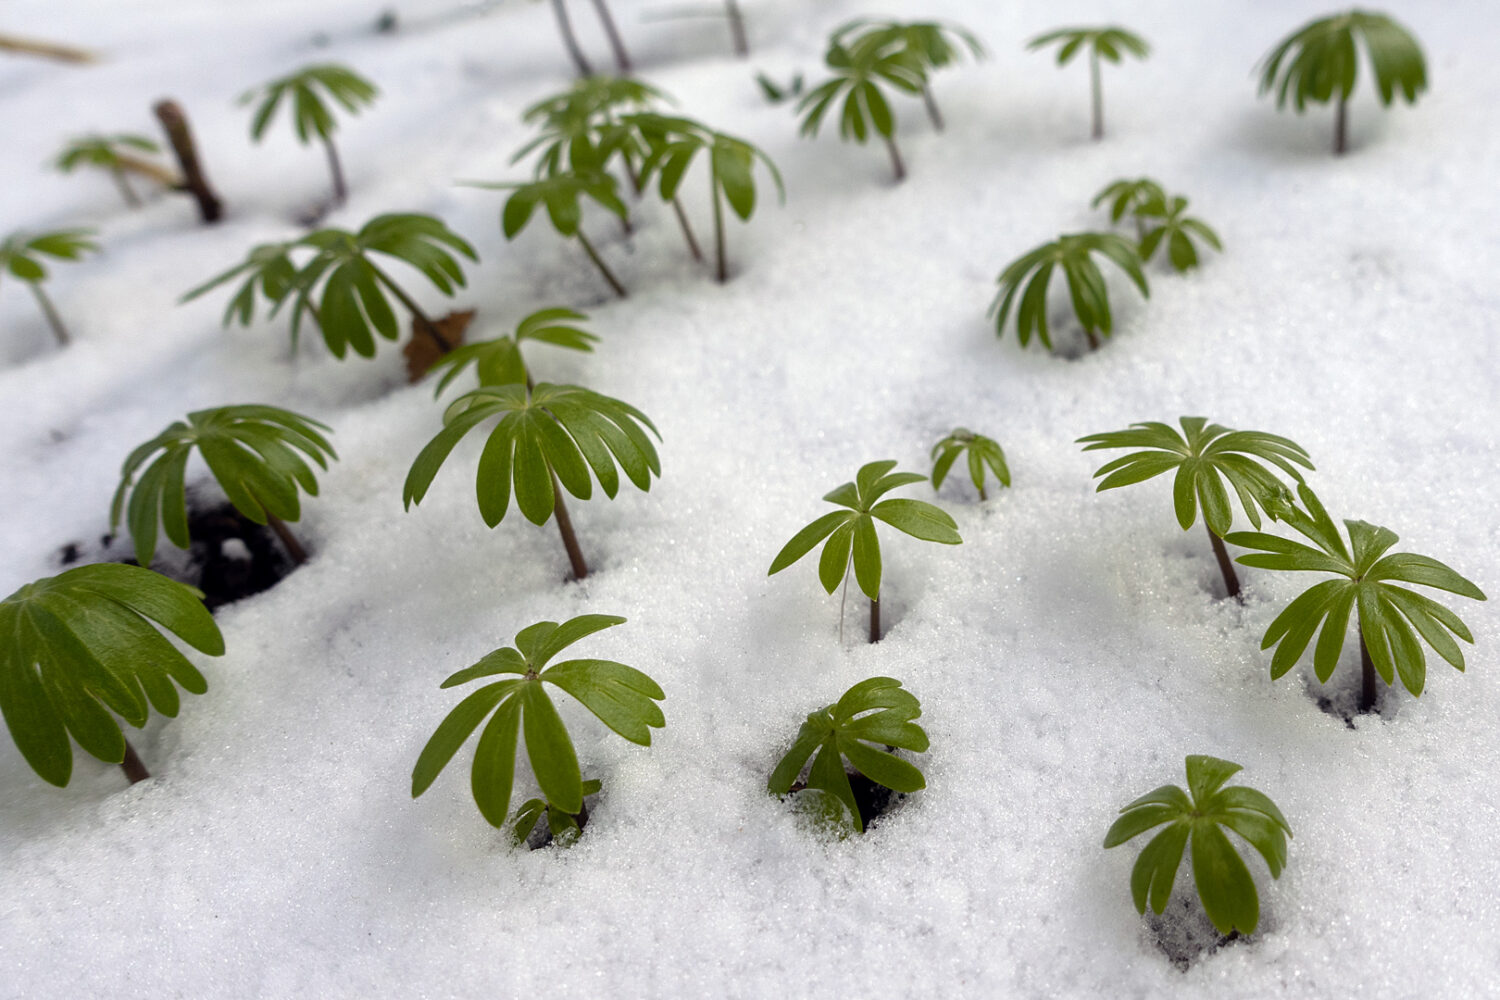 Tiny Mayflowers in the snow